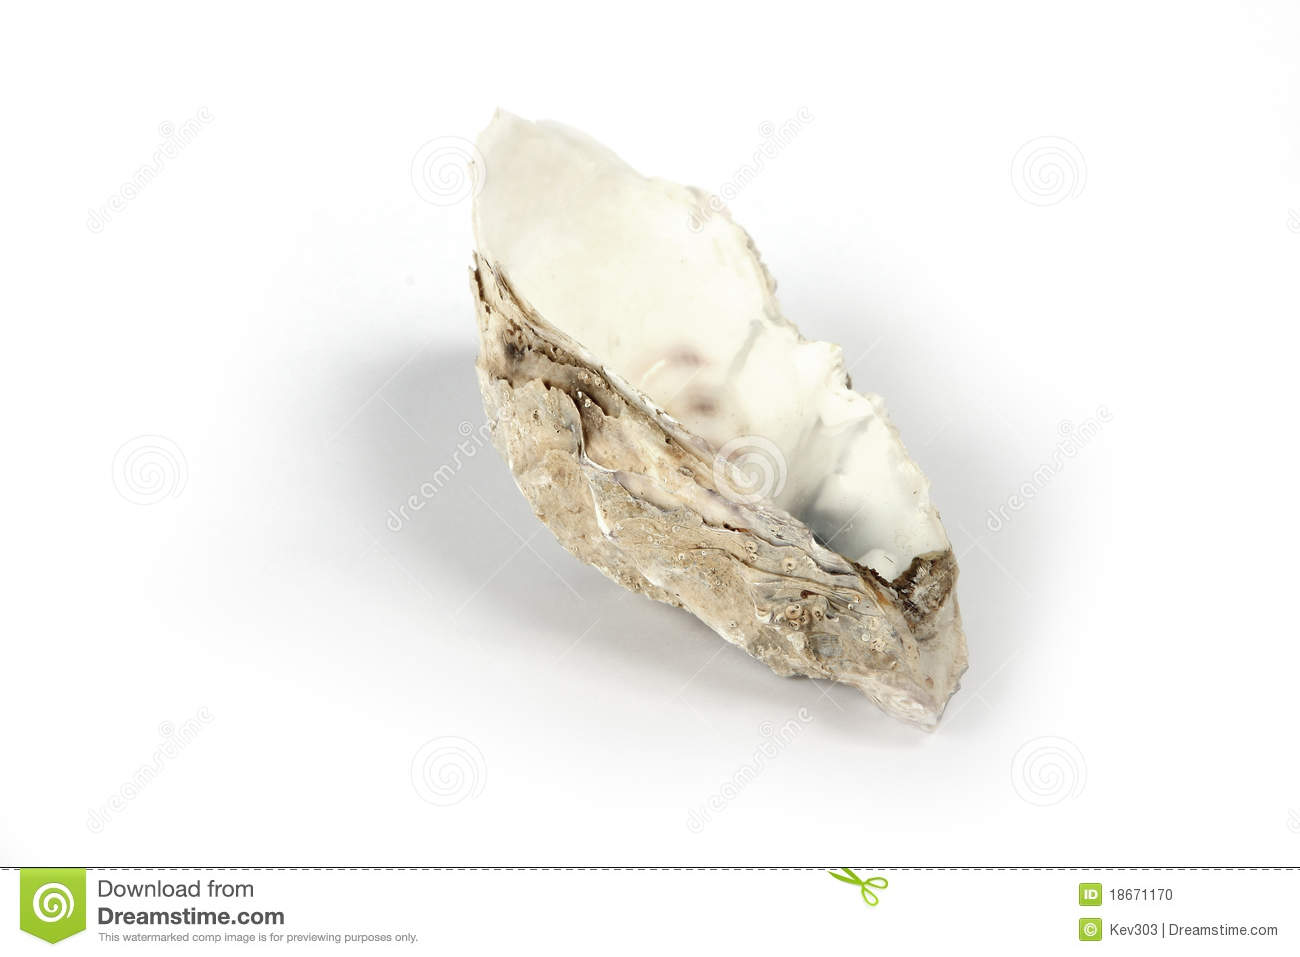 Details Of One Half Of A Large Oyster Shell